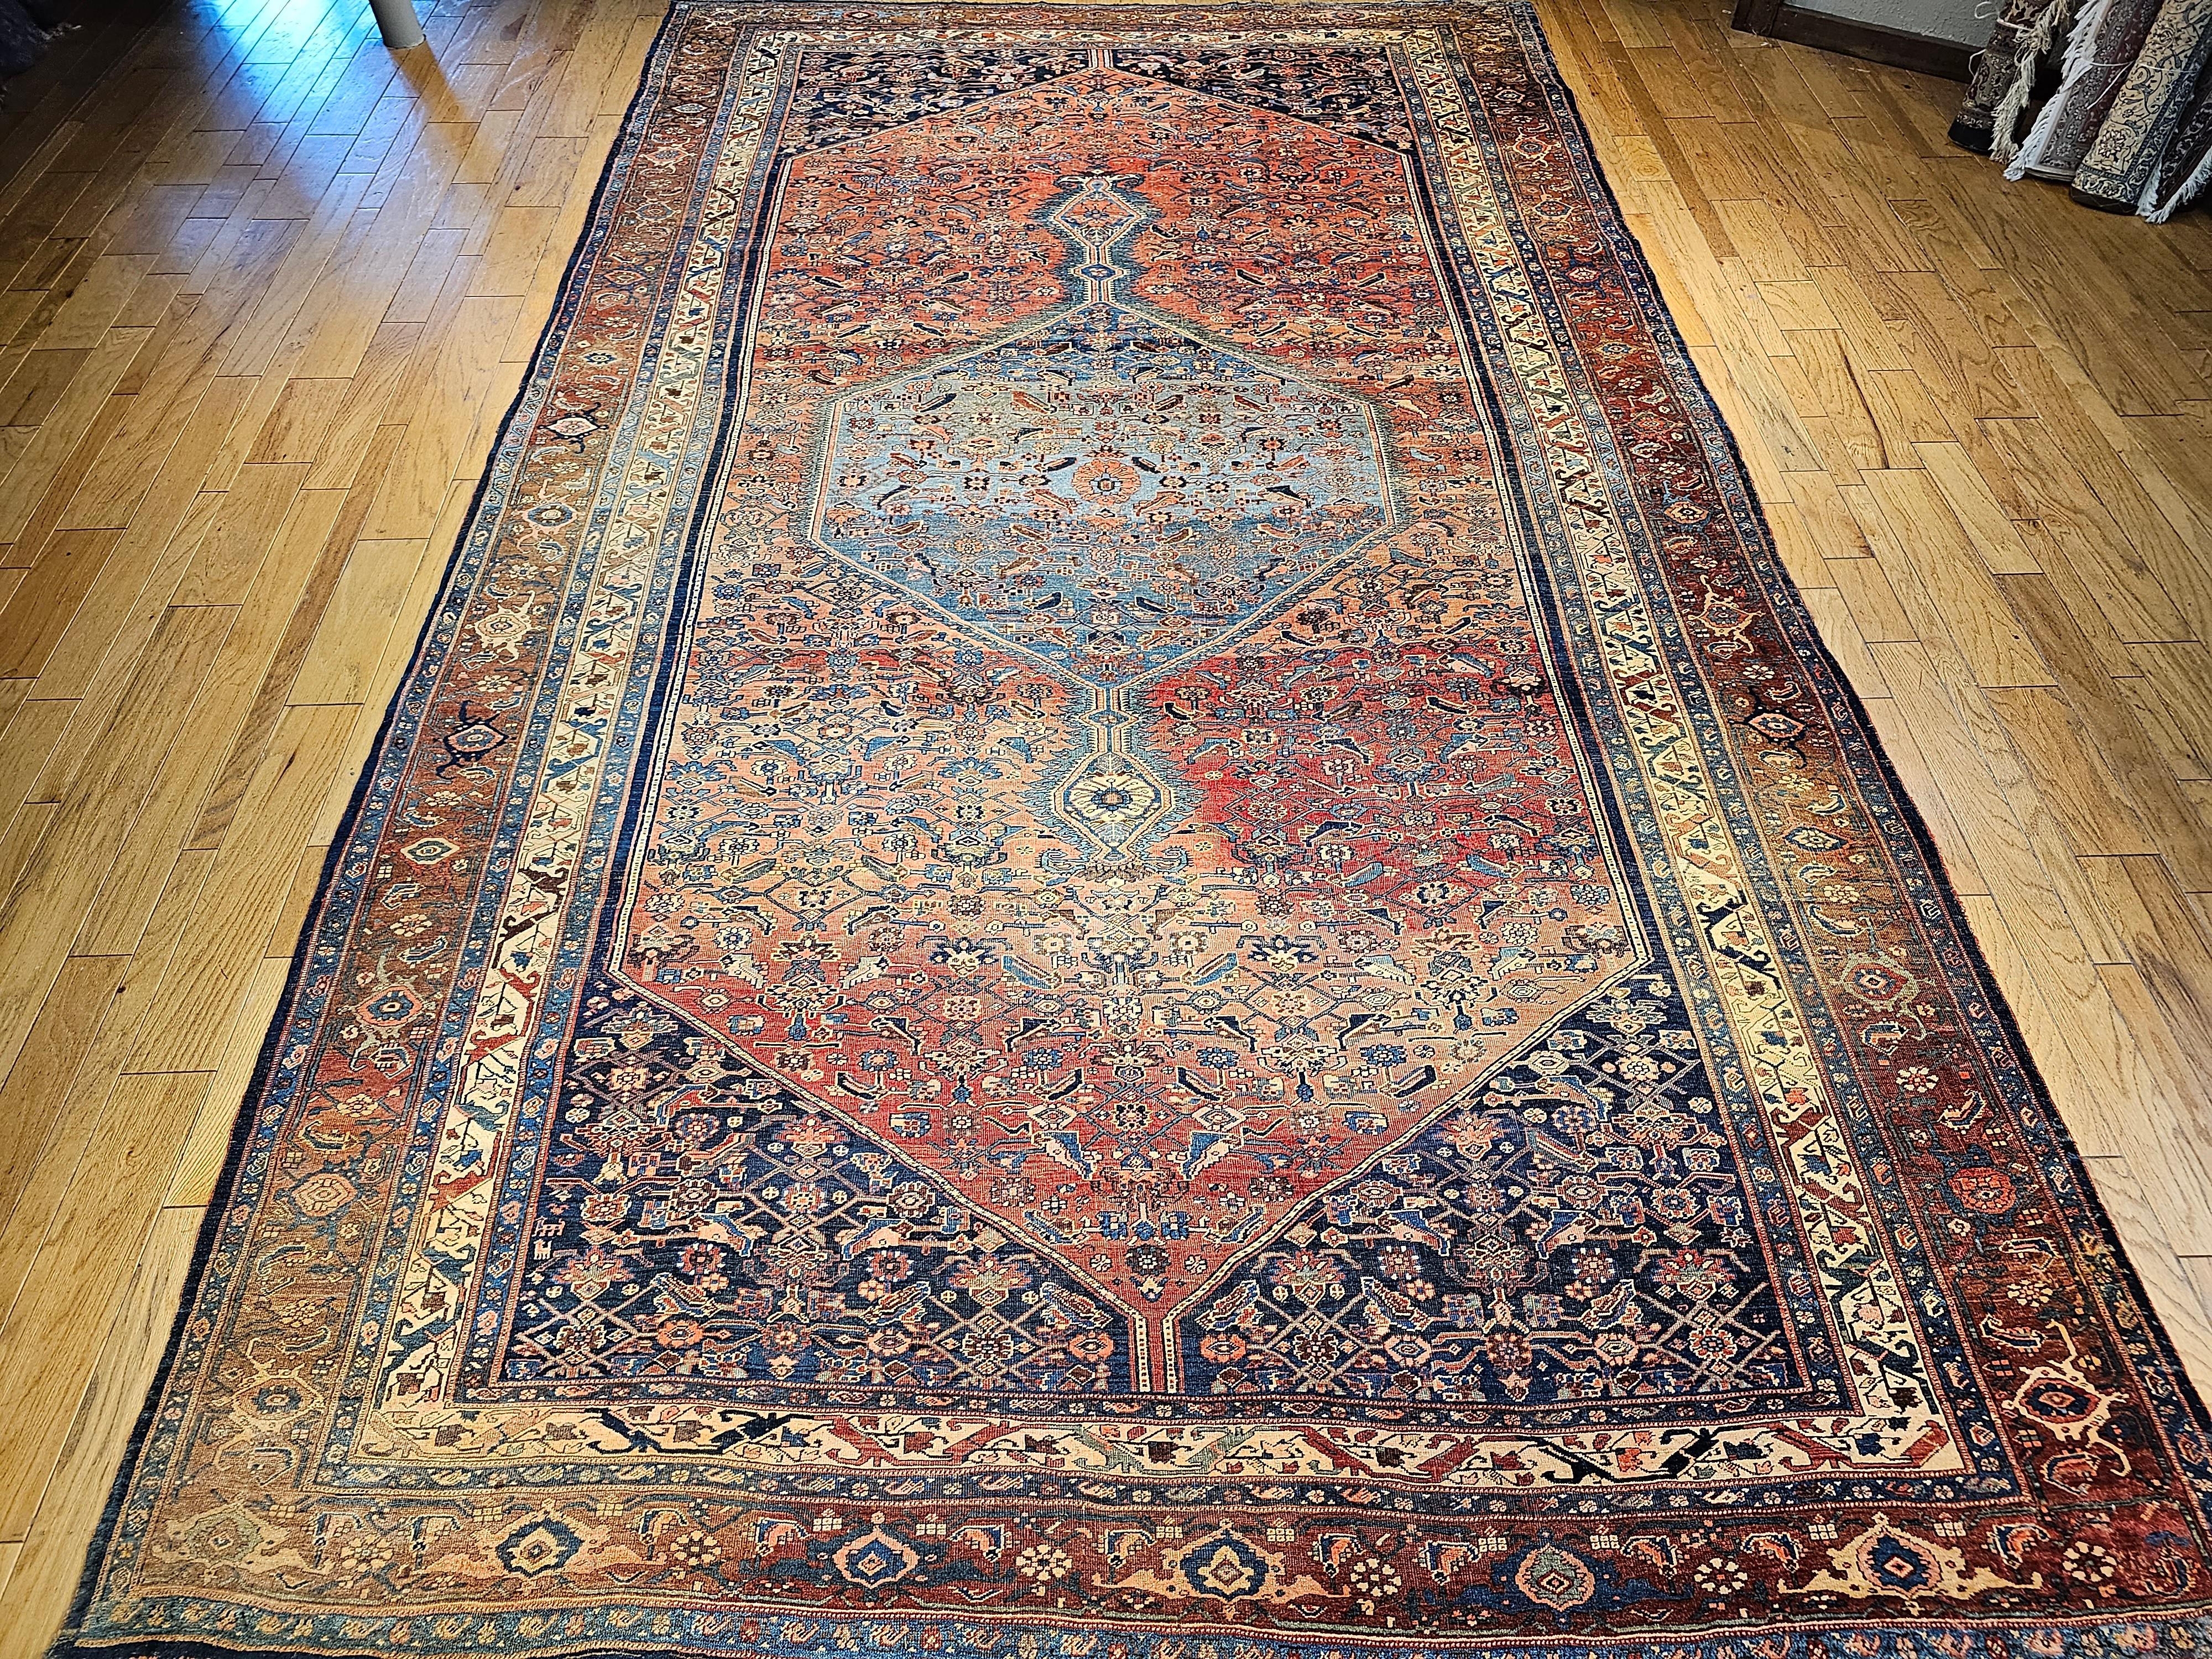 The oversized Persian Bidjar (Bijar) rug is a great example of the art of Persian rug weaving from the last quarter of the 1800s. The Bidjar (Bijar) rug is a very unique and extremely desirable “Herati” design  in an abrash multicolor baby blue and